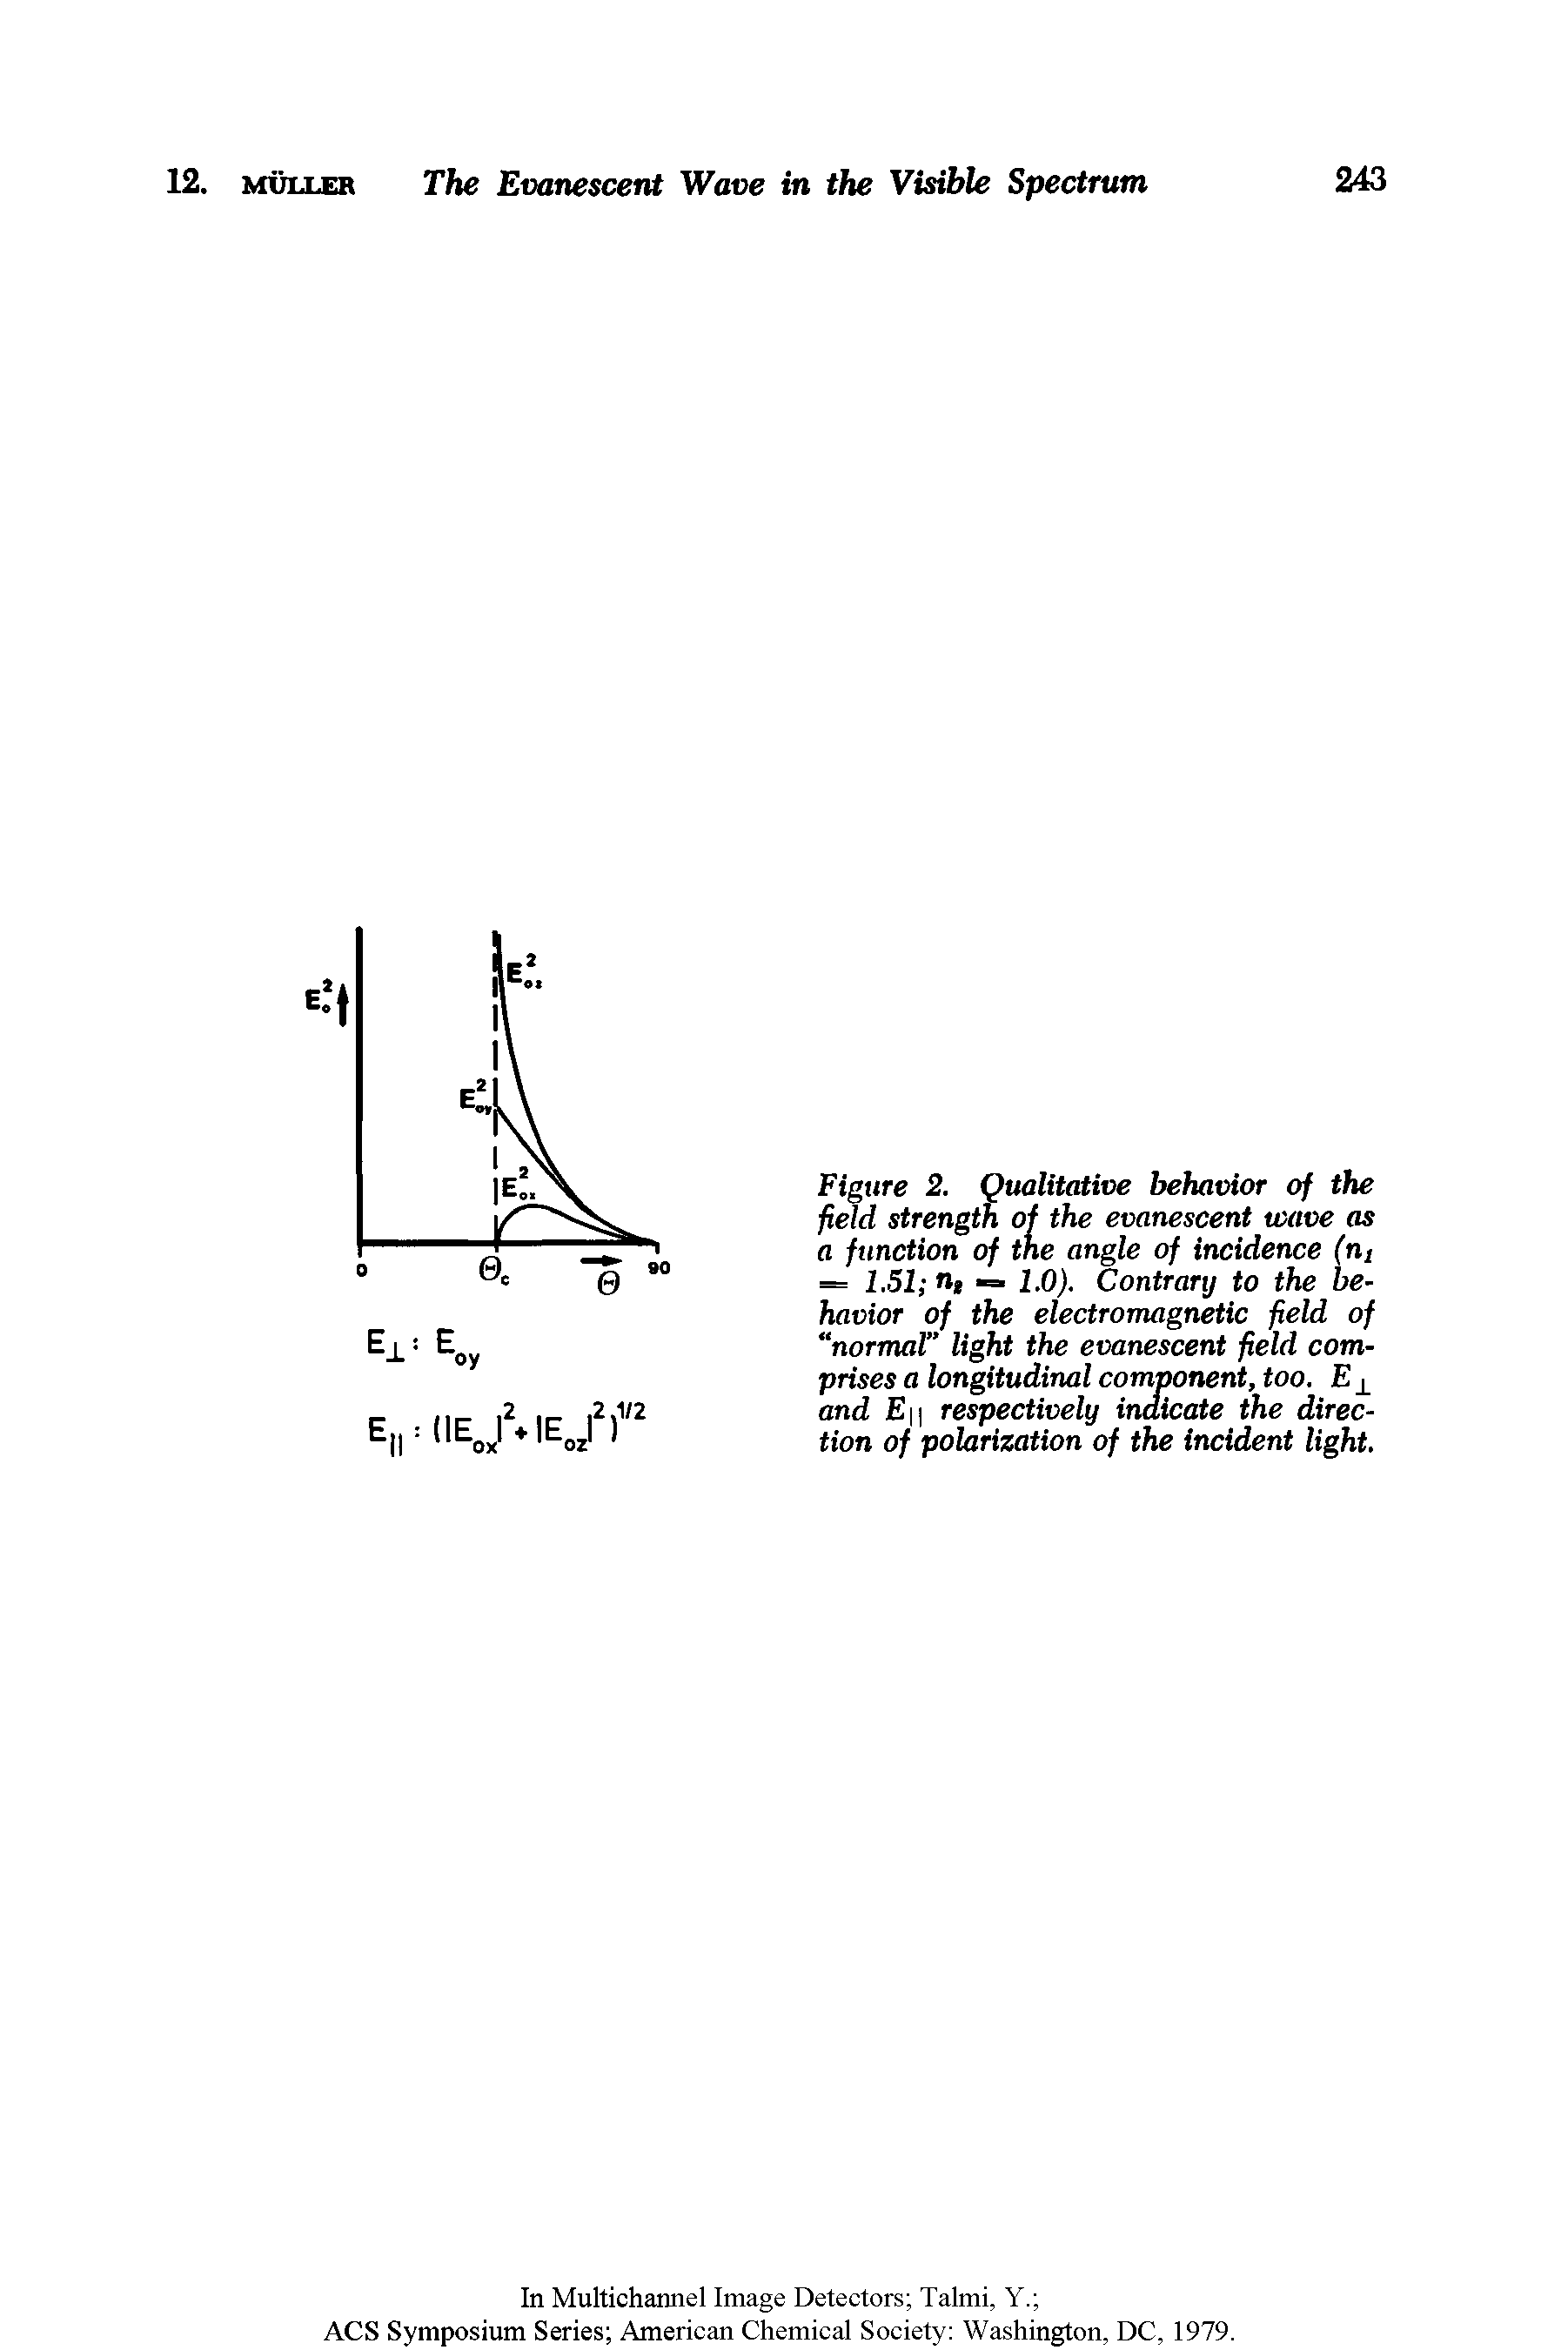 Figure 2. Qualitative behavior of the field strength of the evanescent wave as a function of the angle of incidence (nt — 1,51 n -= 1.0). Contrary to the behavior of the electromagnetic field of normal" light the evanescent field comprises a longitudinal component, too. E and E respectively indicate the direction of polarization of the incident light.